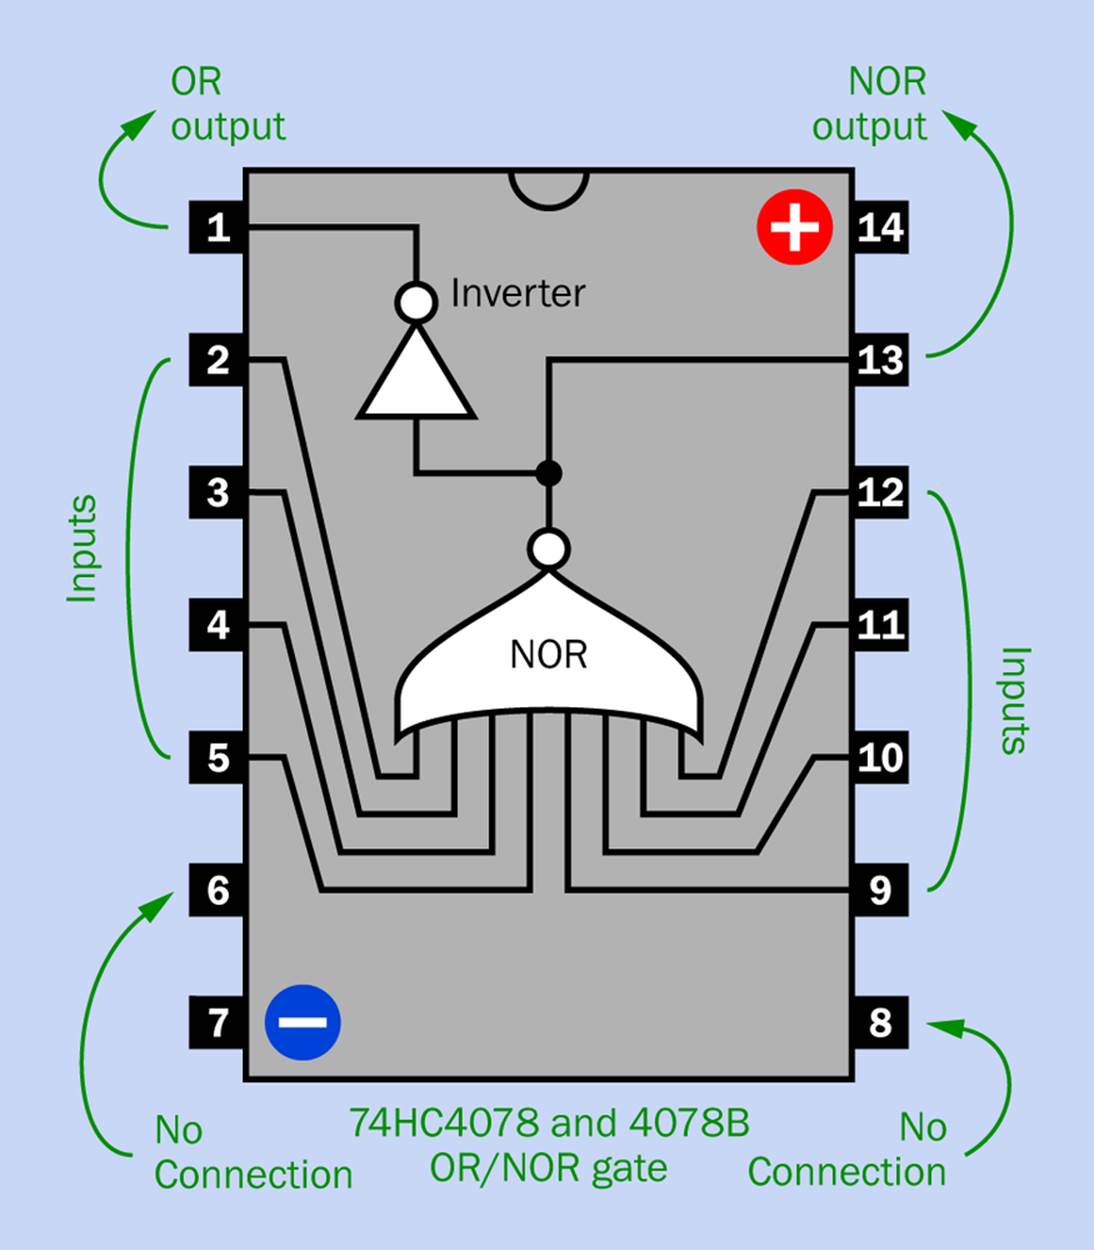 Pinouts of the 74HC4078 and the 4078B, either of which may be used in the Ching Thing circuit. These chips provide a choice of an OR output or a NOR output.